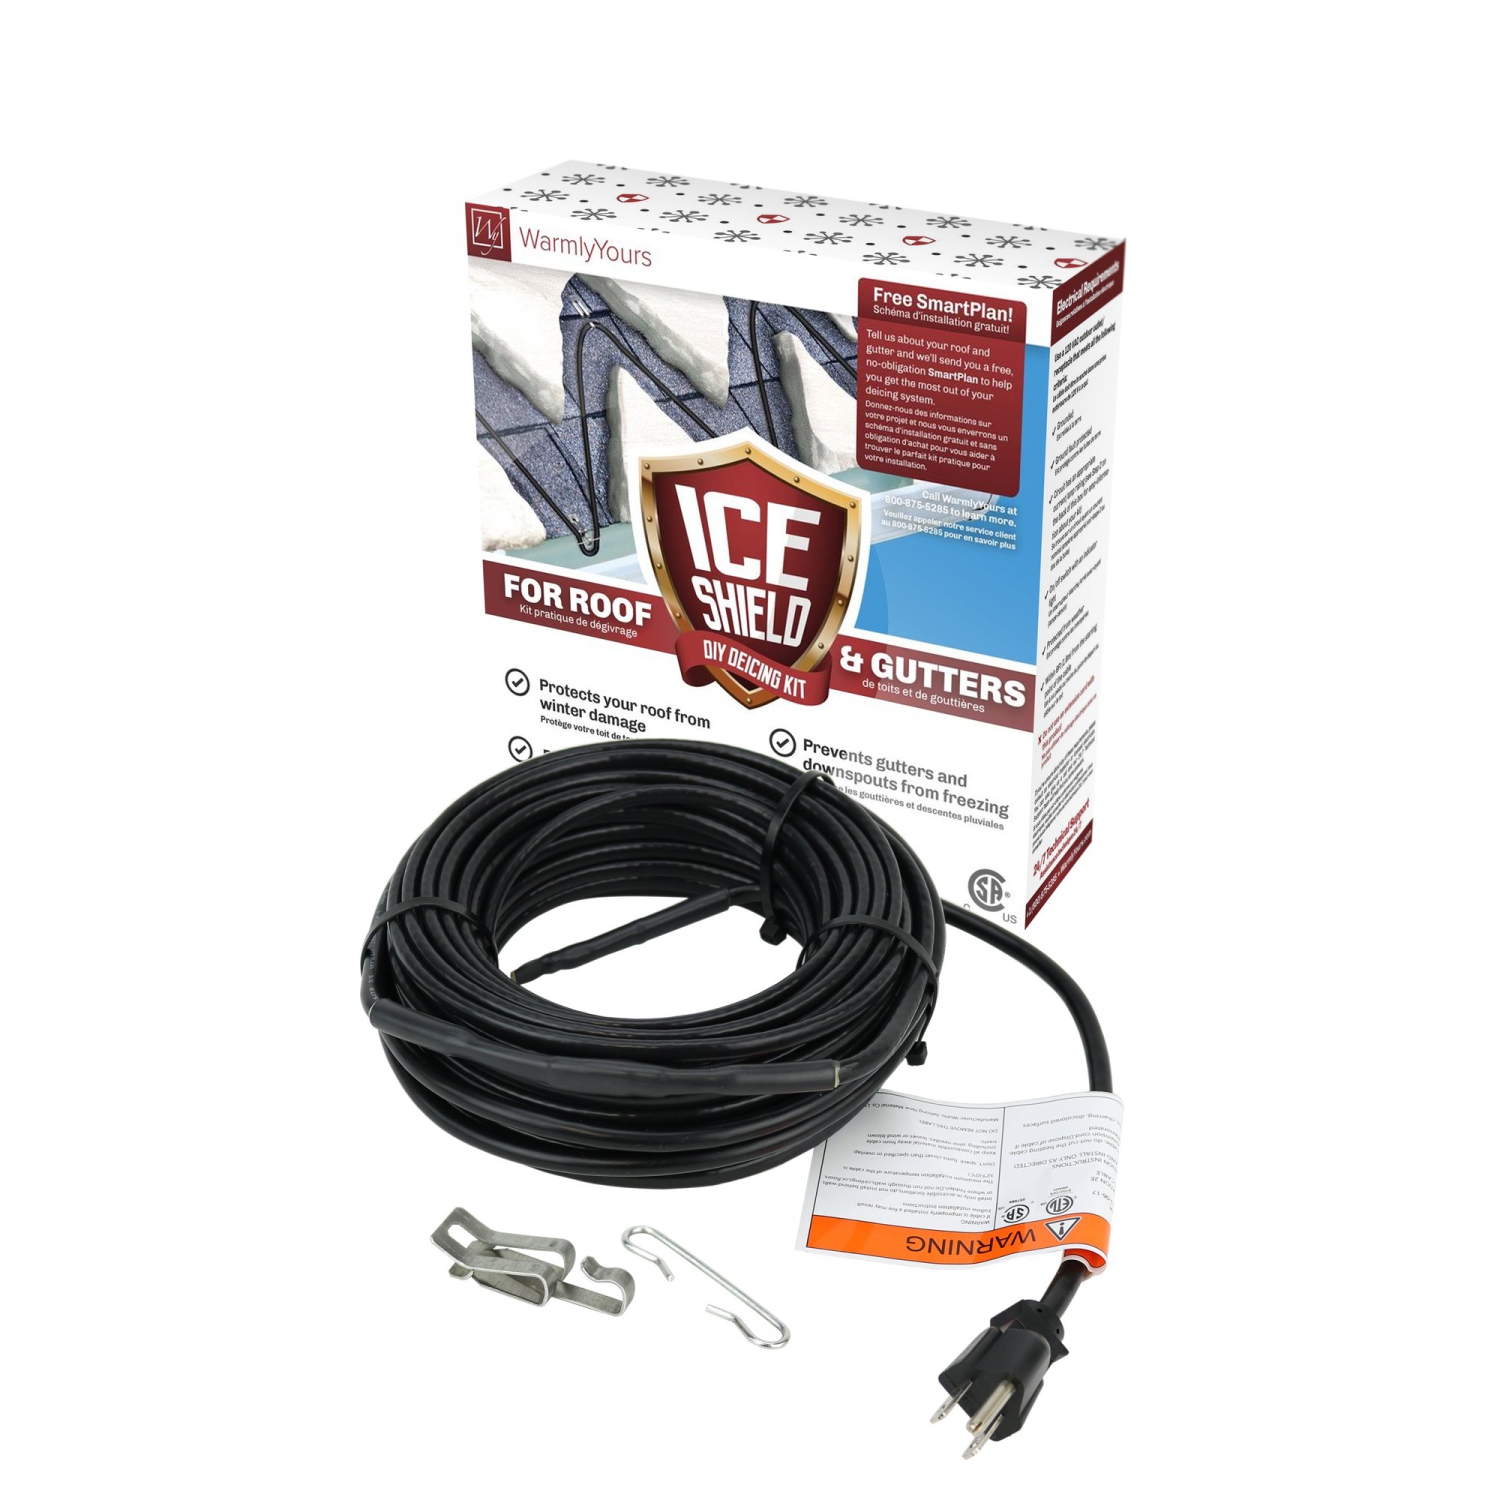 WarmlyYours Ice Shield Roof & Gutter De-icing Cable Kit, 120 ft, Protect from Ice and Snow Damage